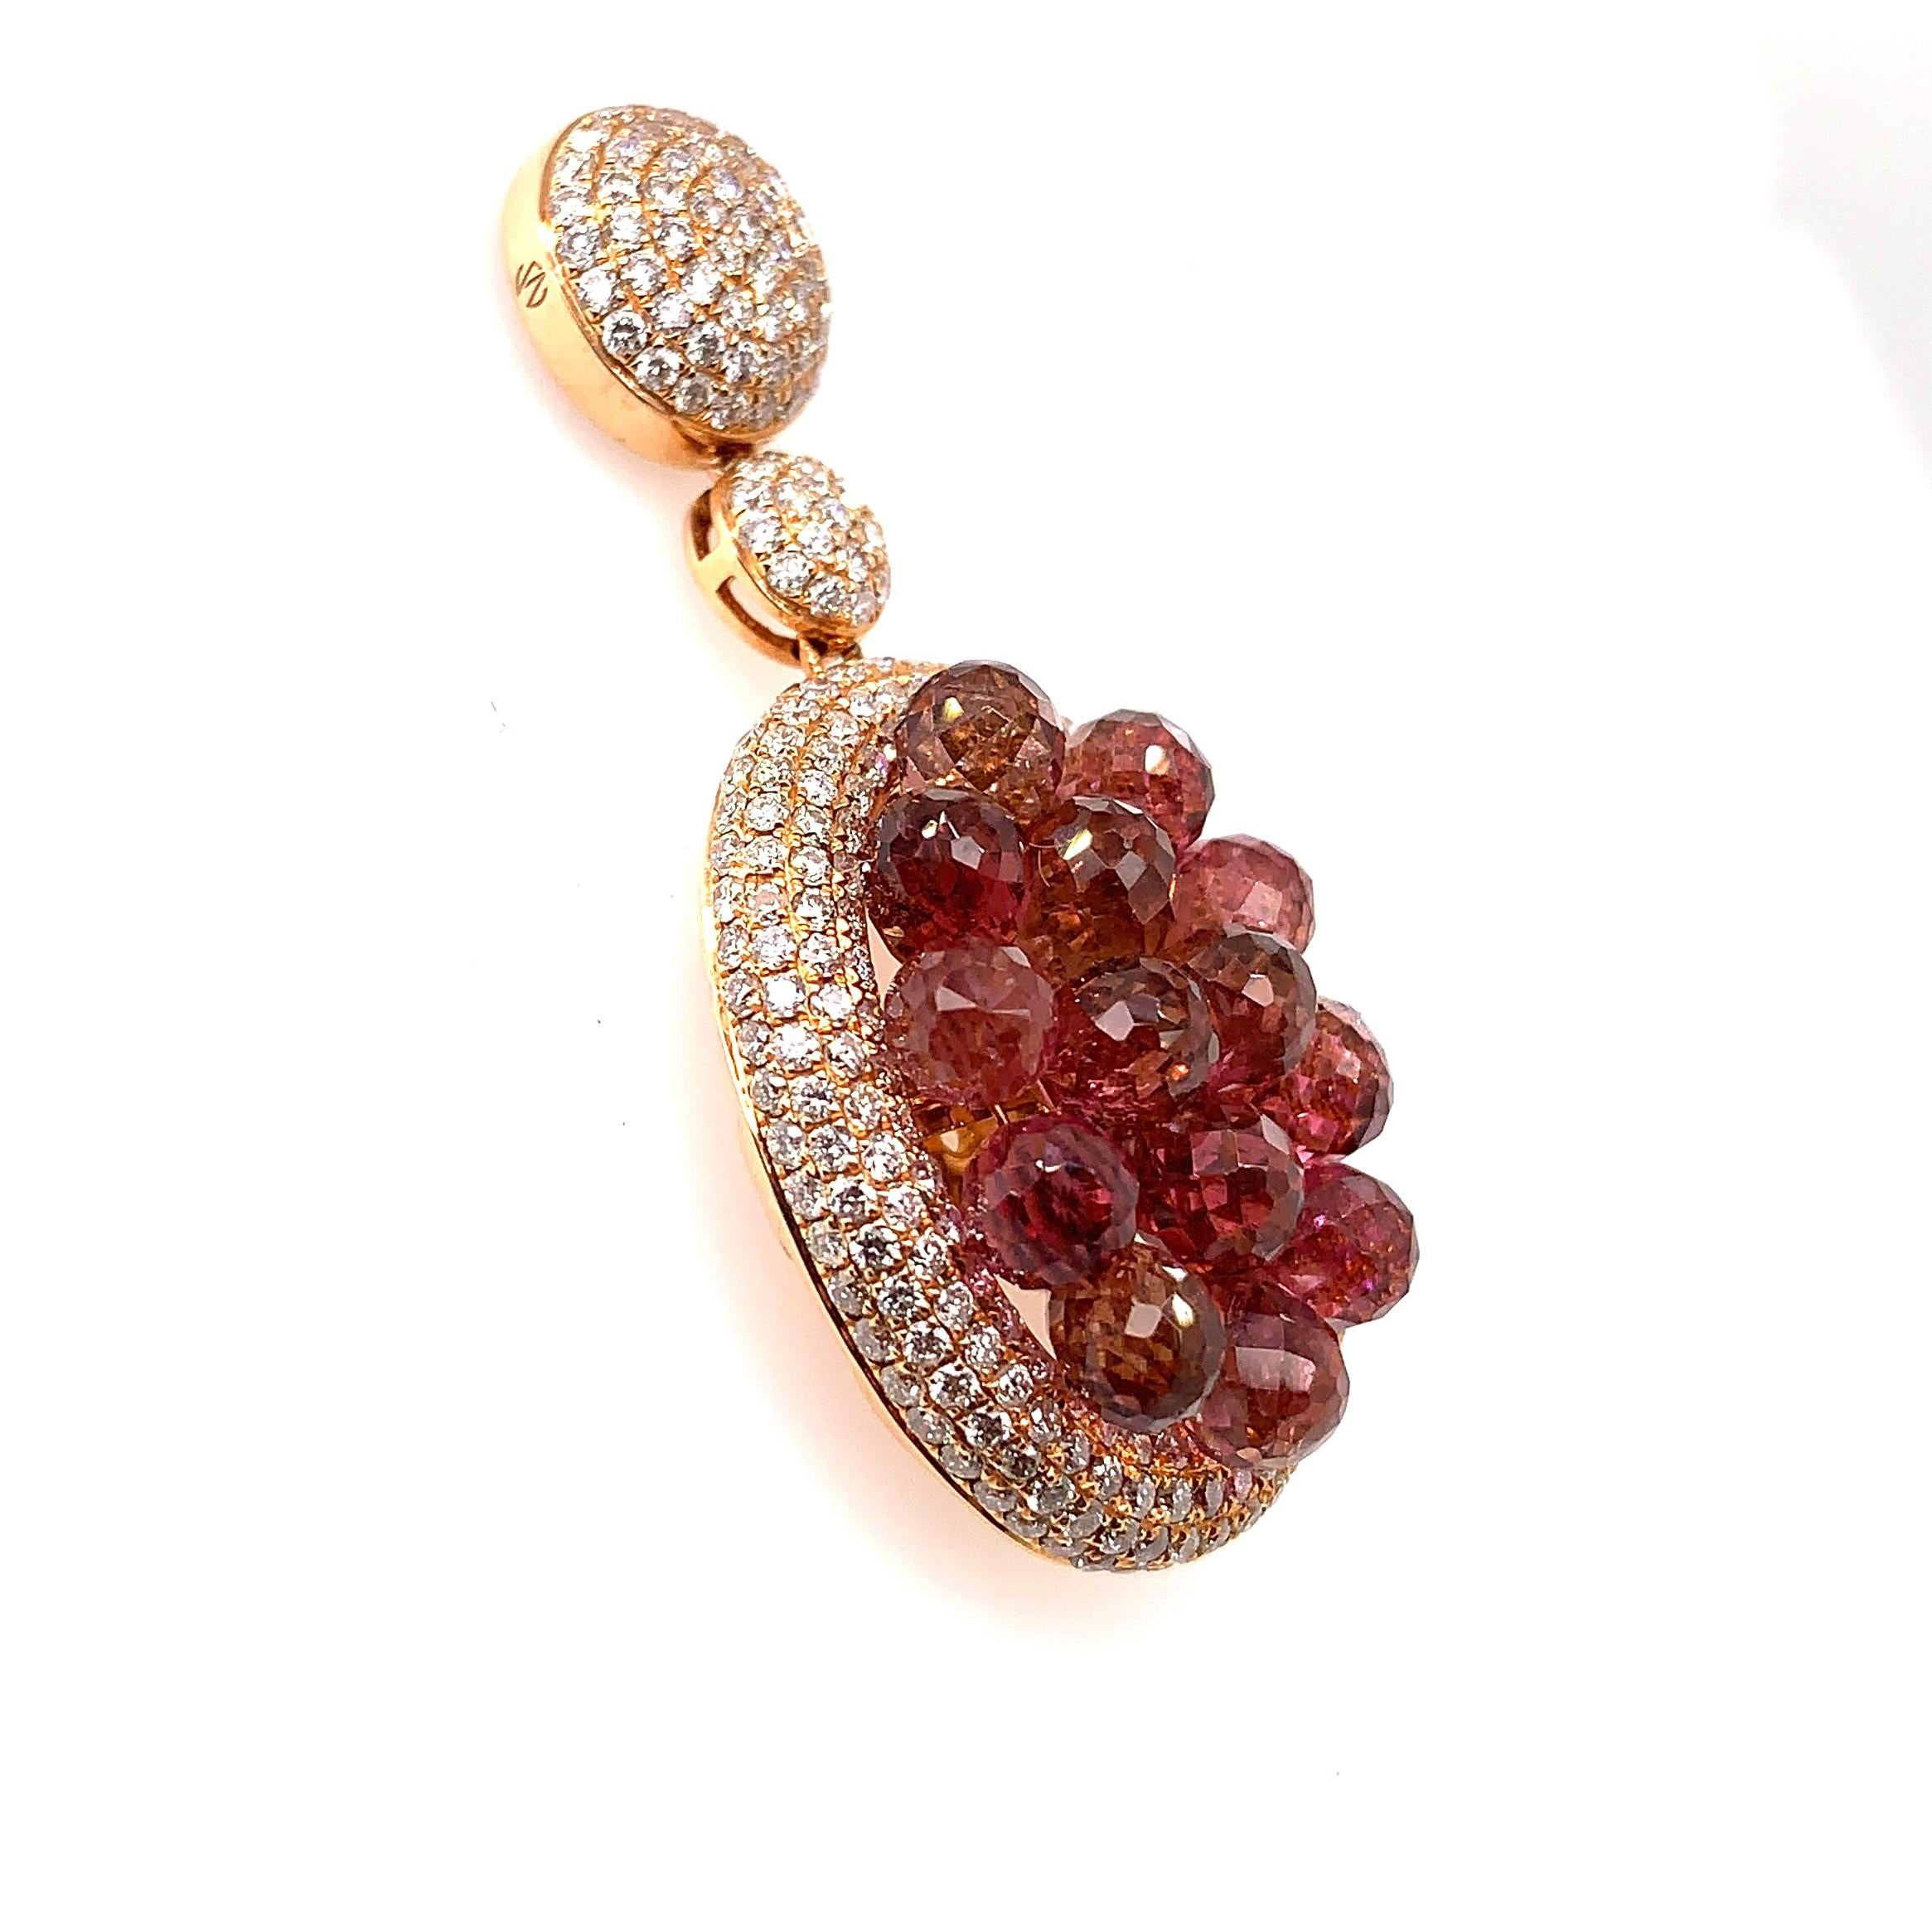 19.41 Carat Pink Tourmaline Earring in 18 Karat Rose Gold with Diamonds For Sale 1